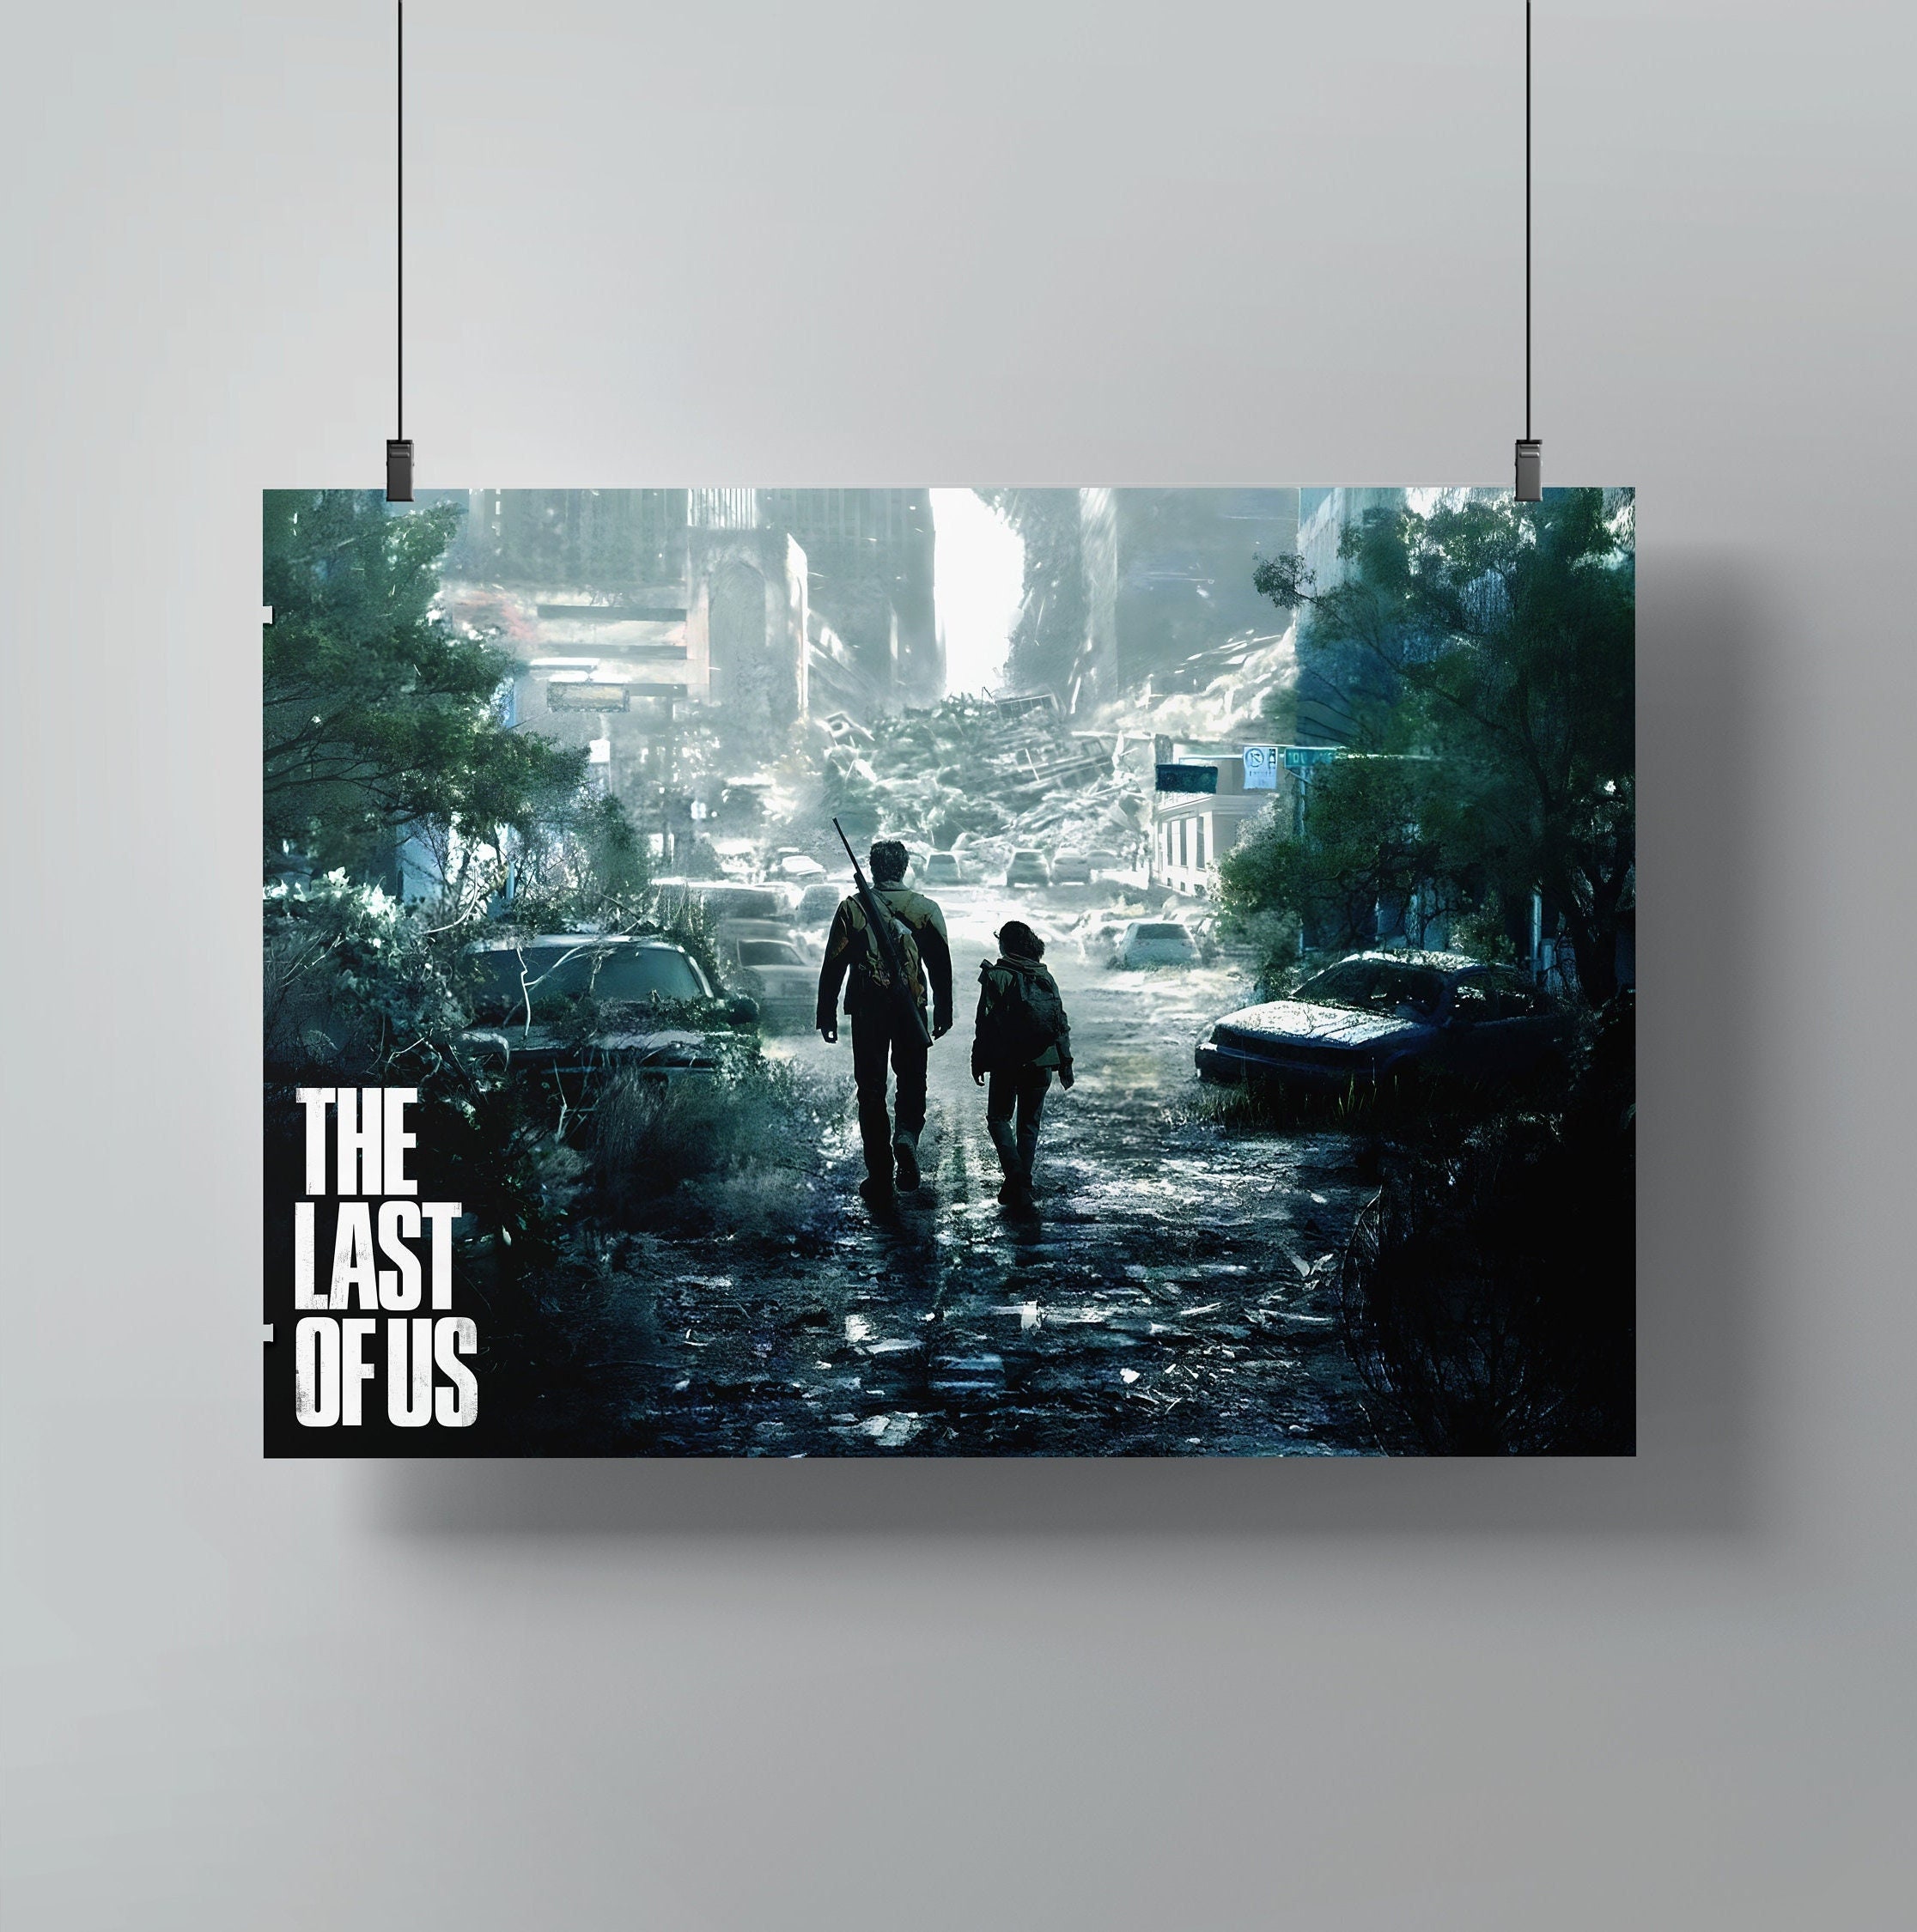 Sweetums Signatures The Last of Us - Part 2 Gaming Poster，12x18inch，30x46cm